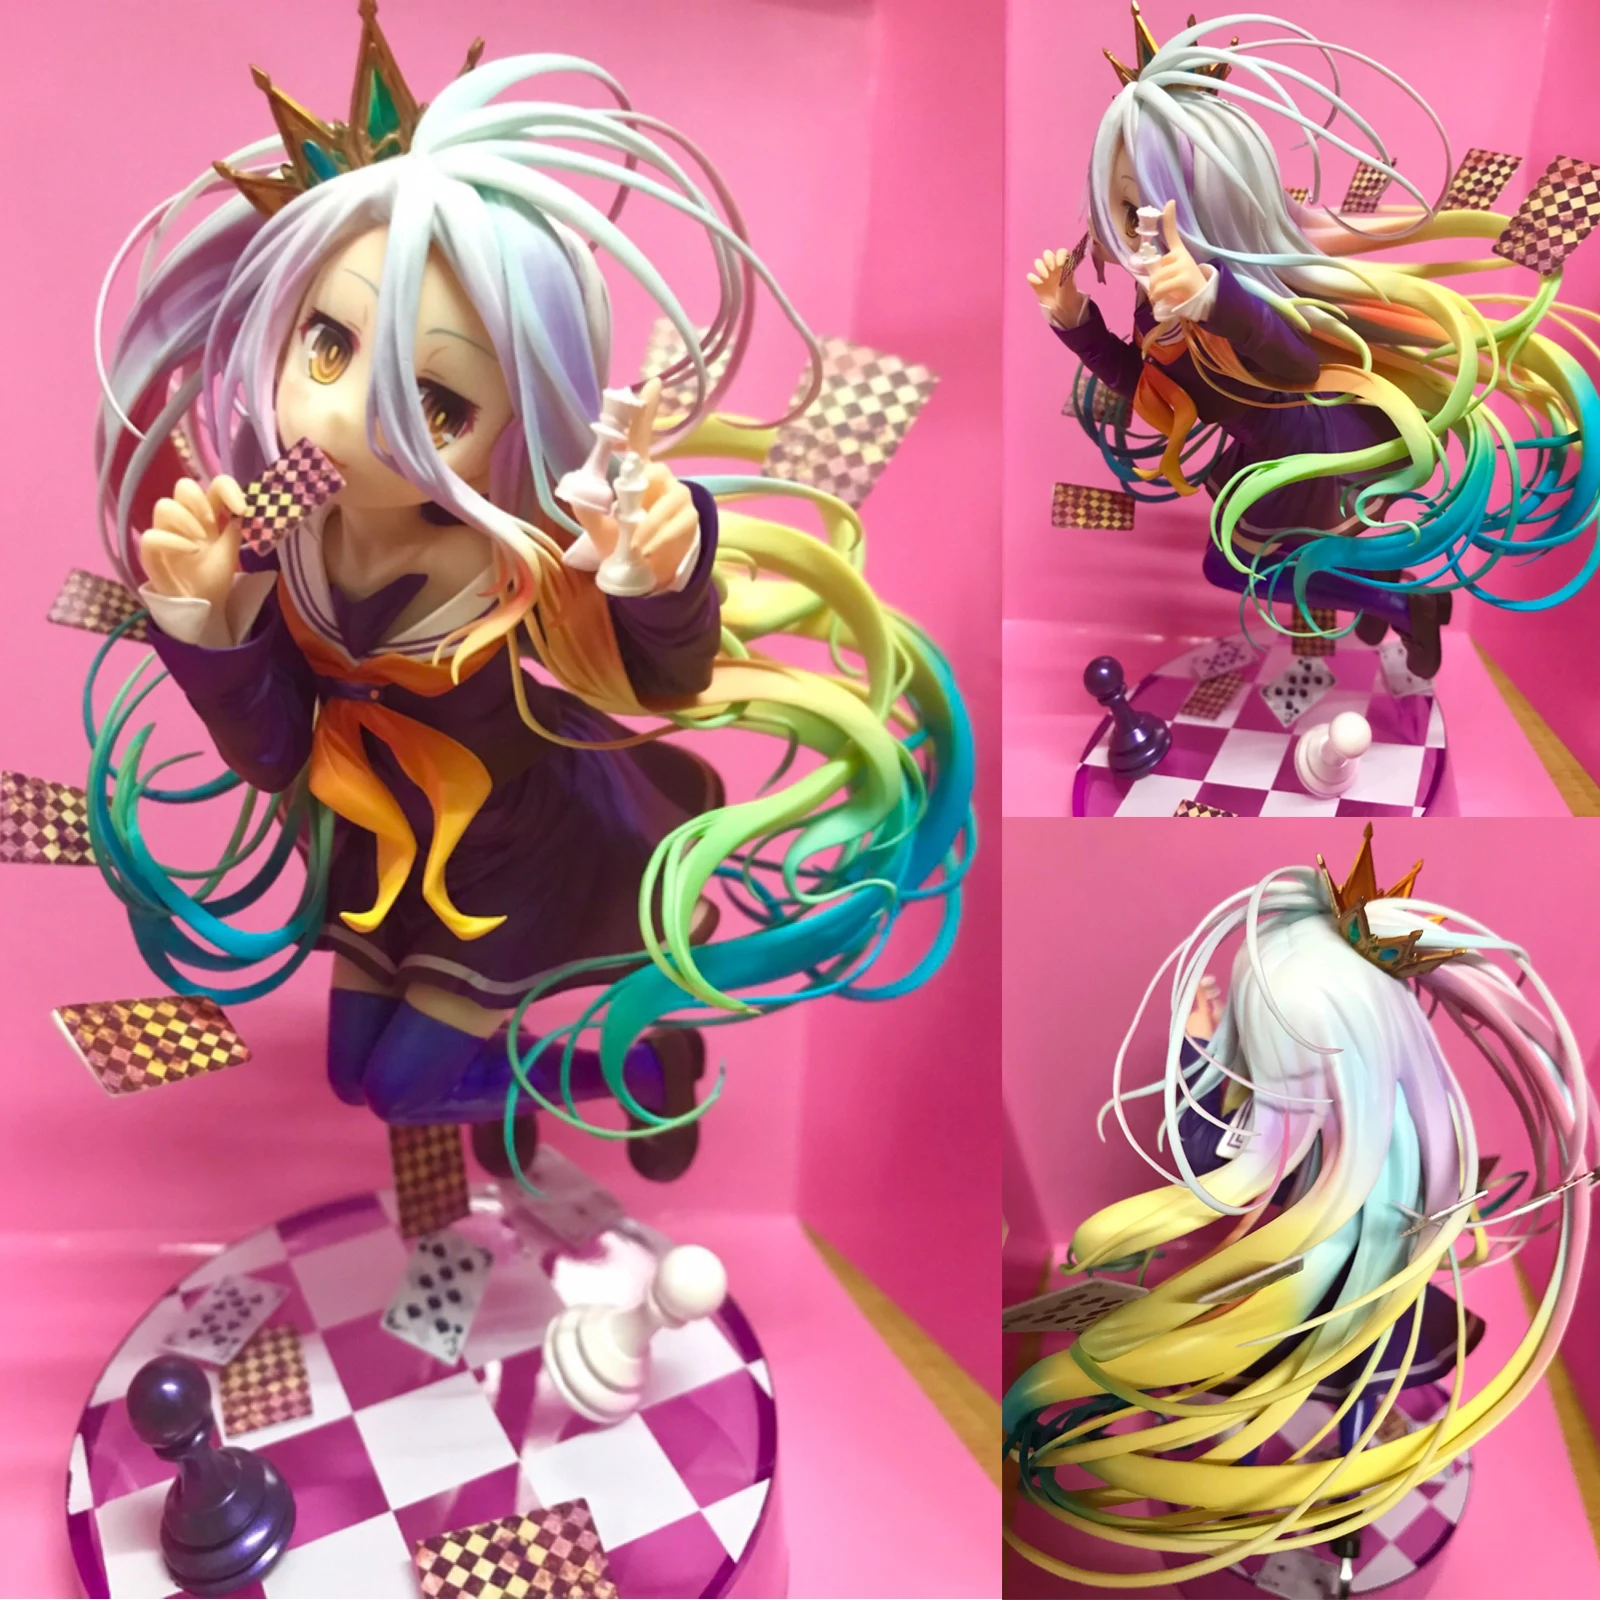 

Japanese Anime No Game No Life White Shiro Poker Sexy Girl Figurine PVC Action Figure Collection Model Toys Doll Ornaments Gift